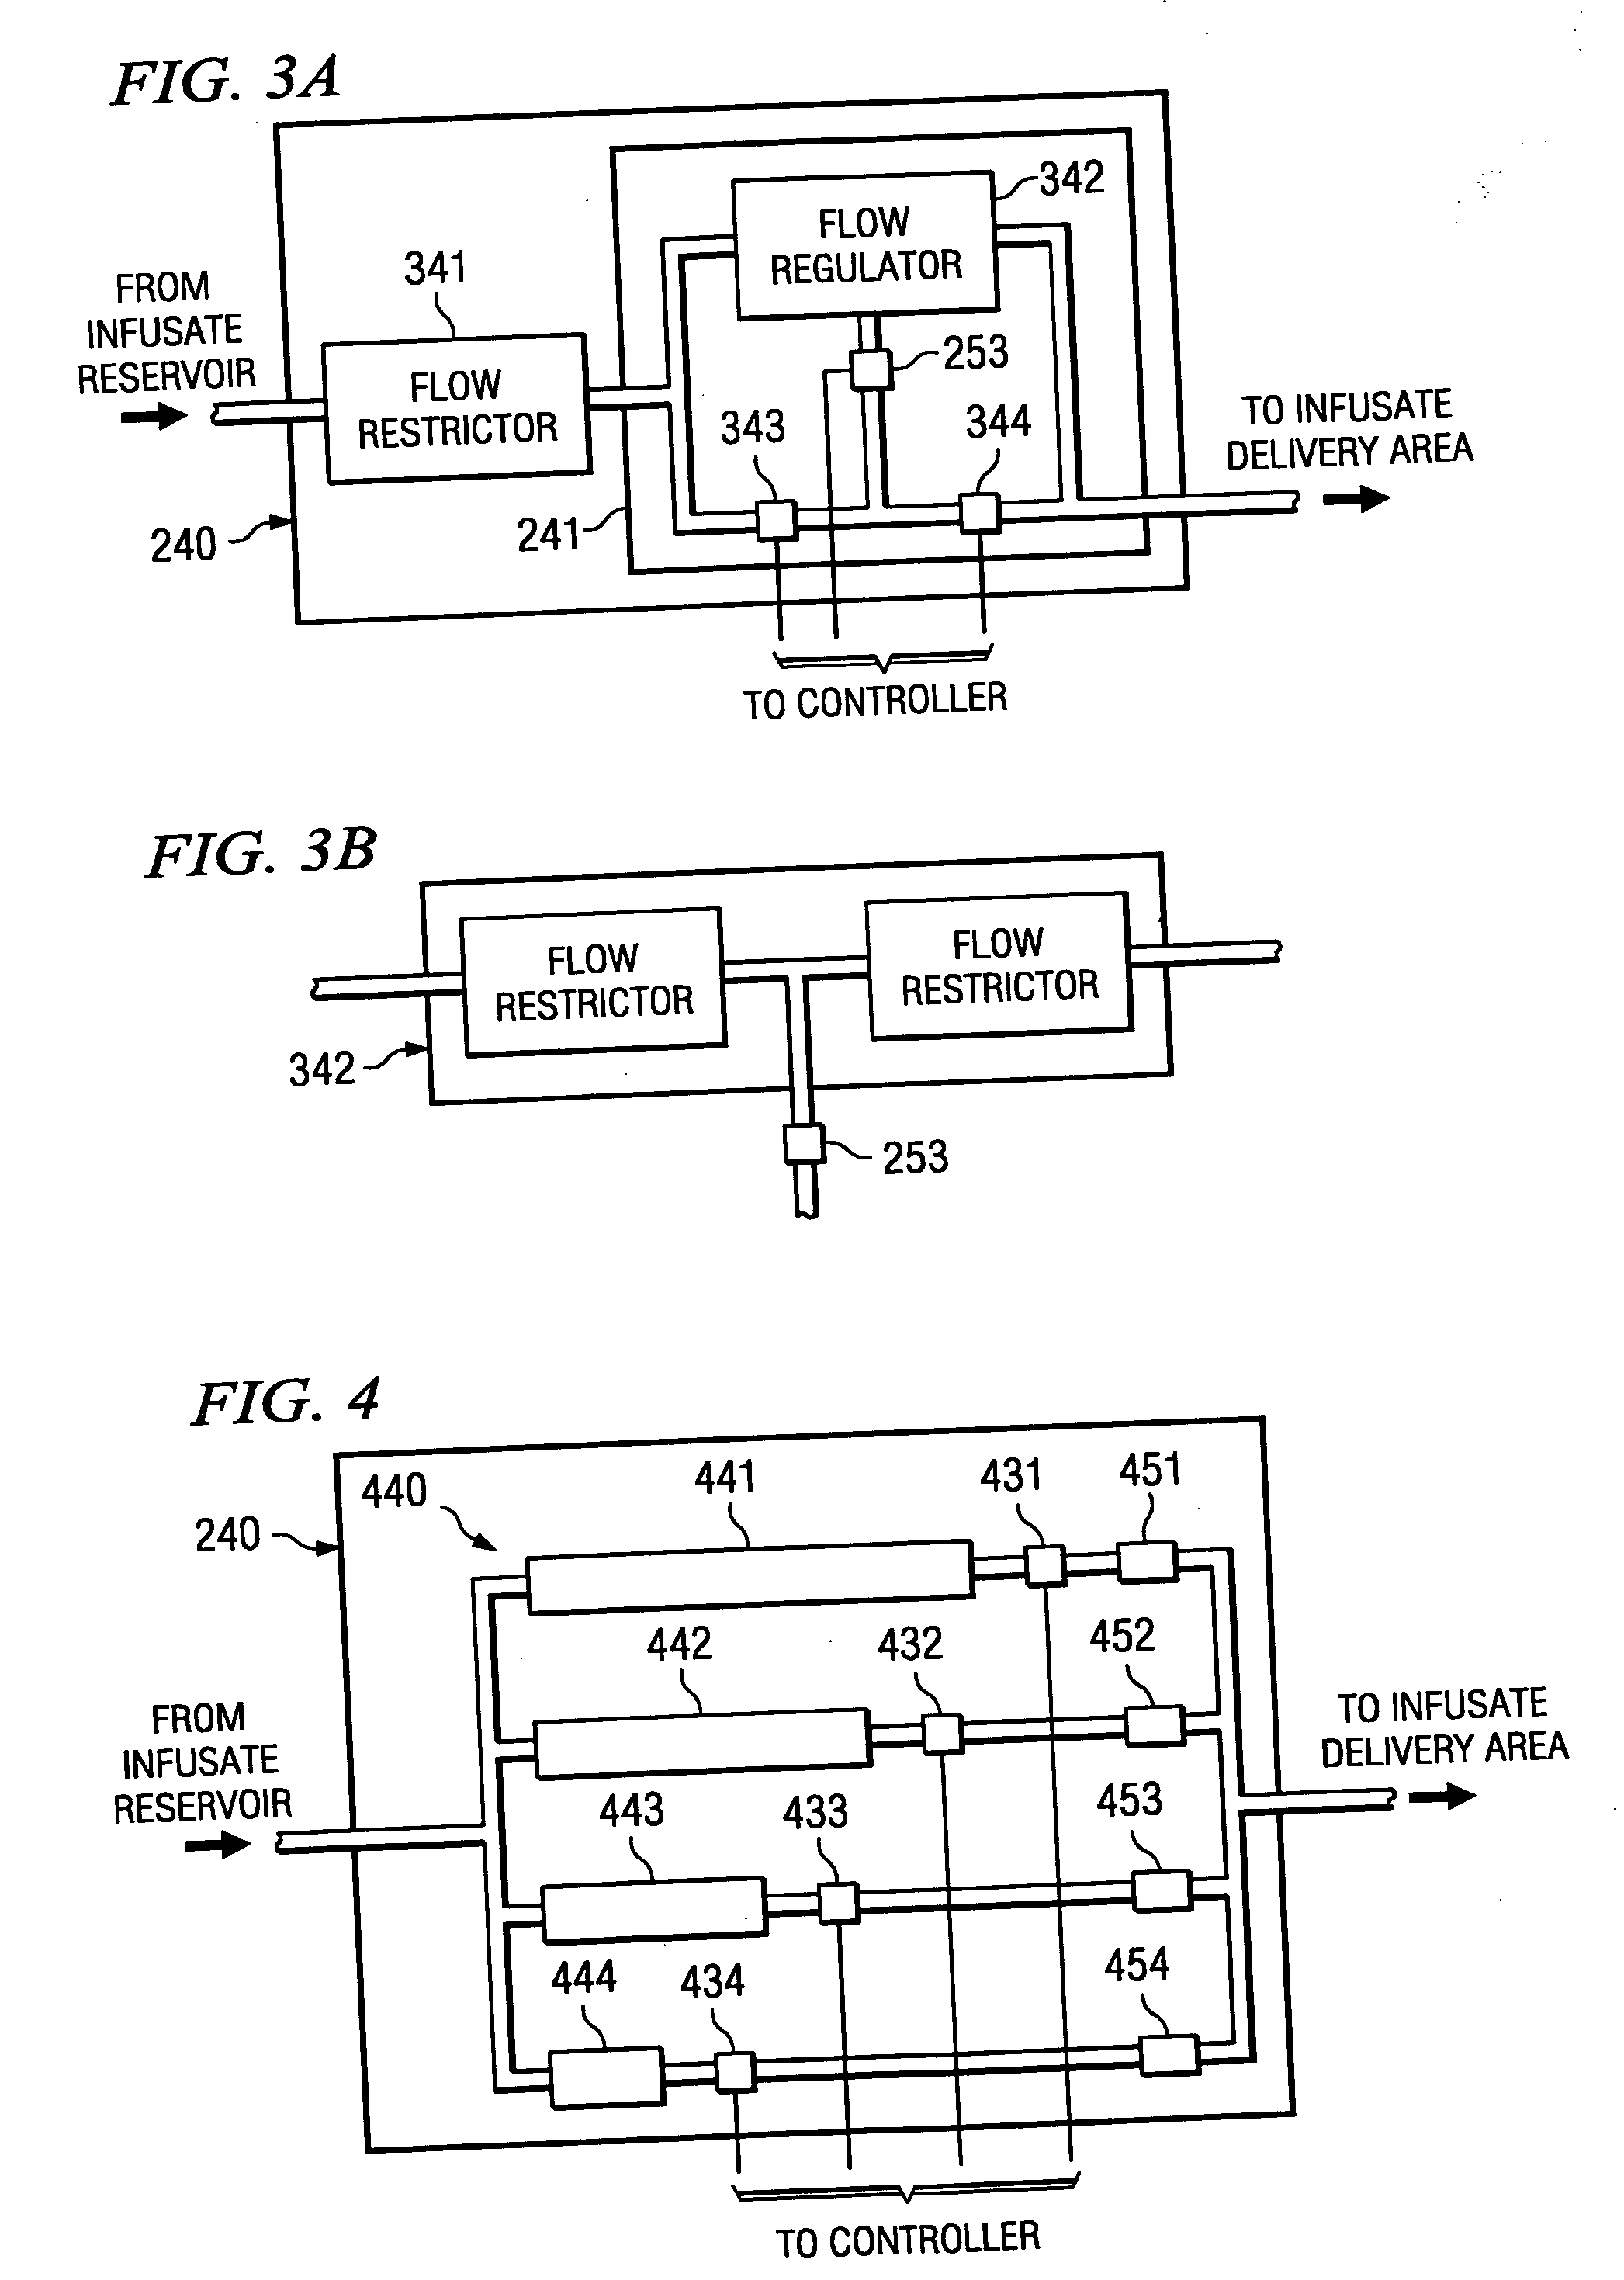 Reduced size programmable drug pump